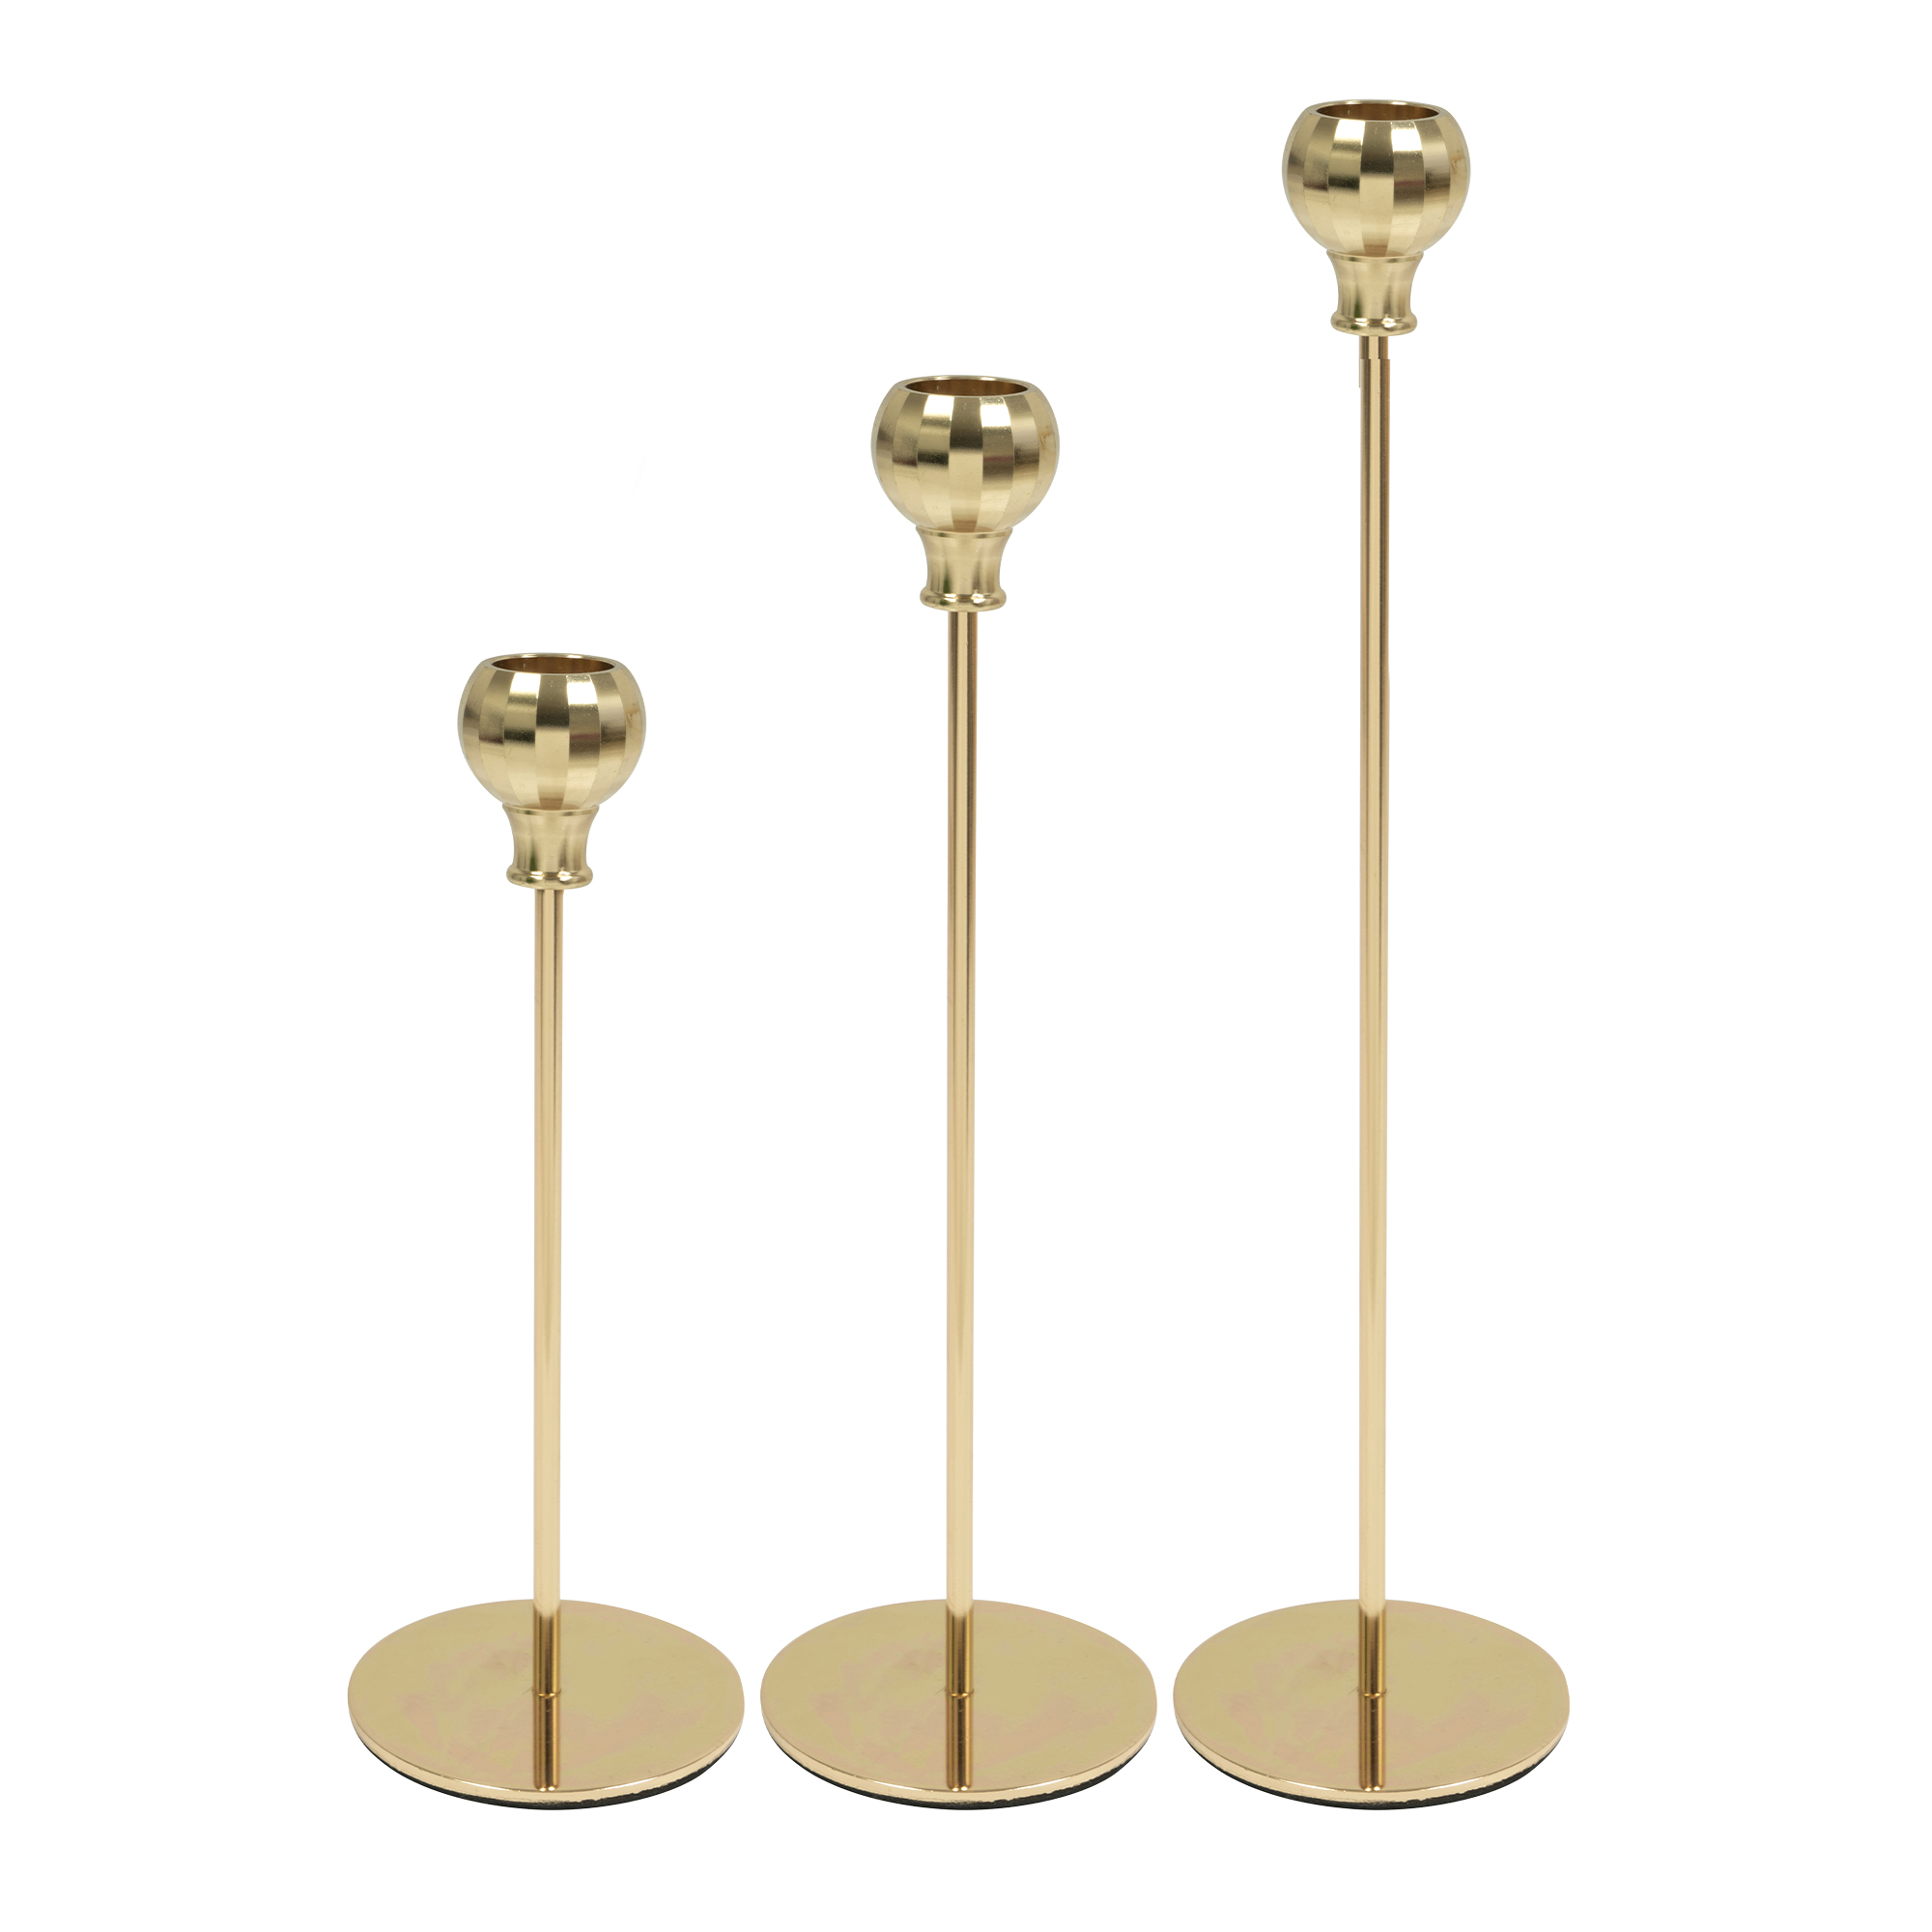 Metal Candle Holder Stand 3pc Set - Gold